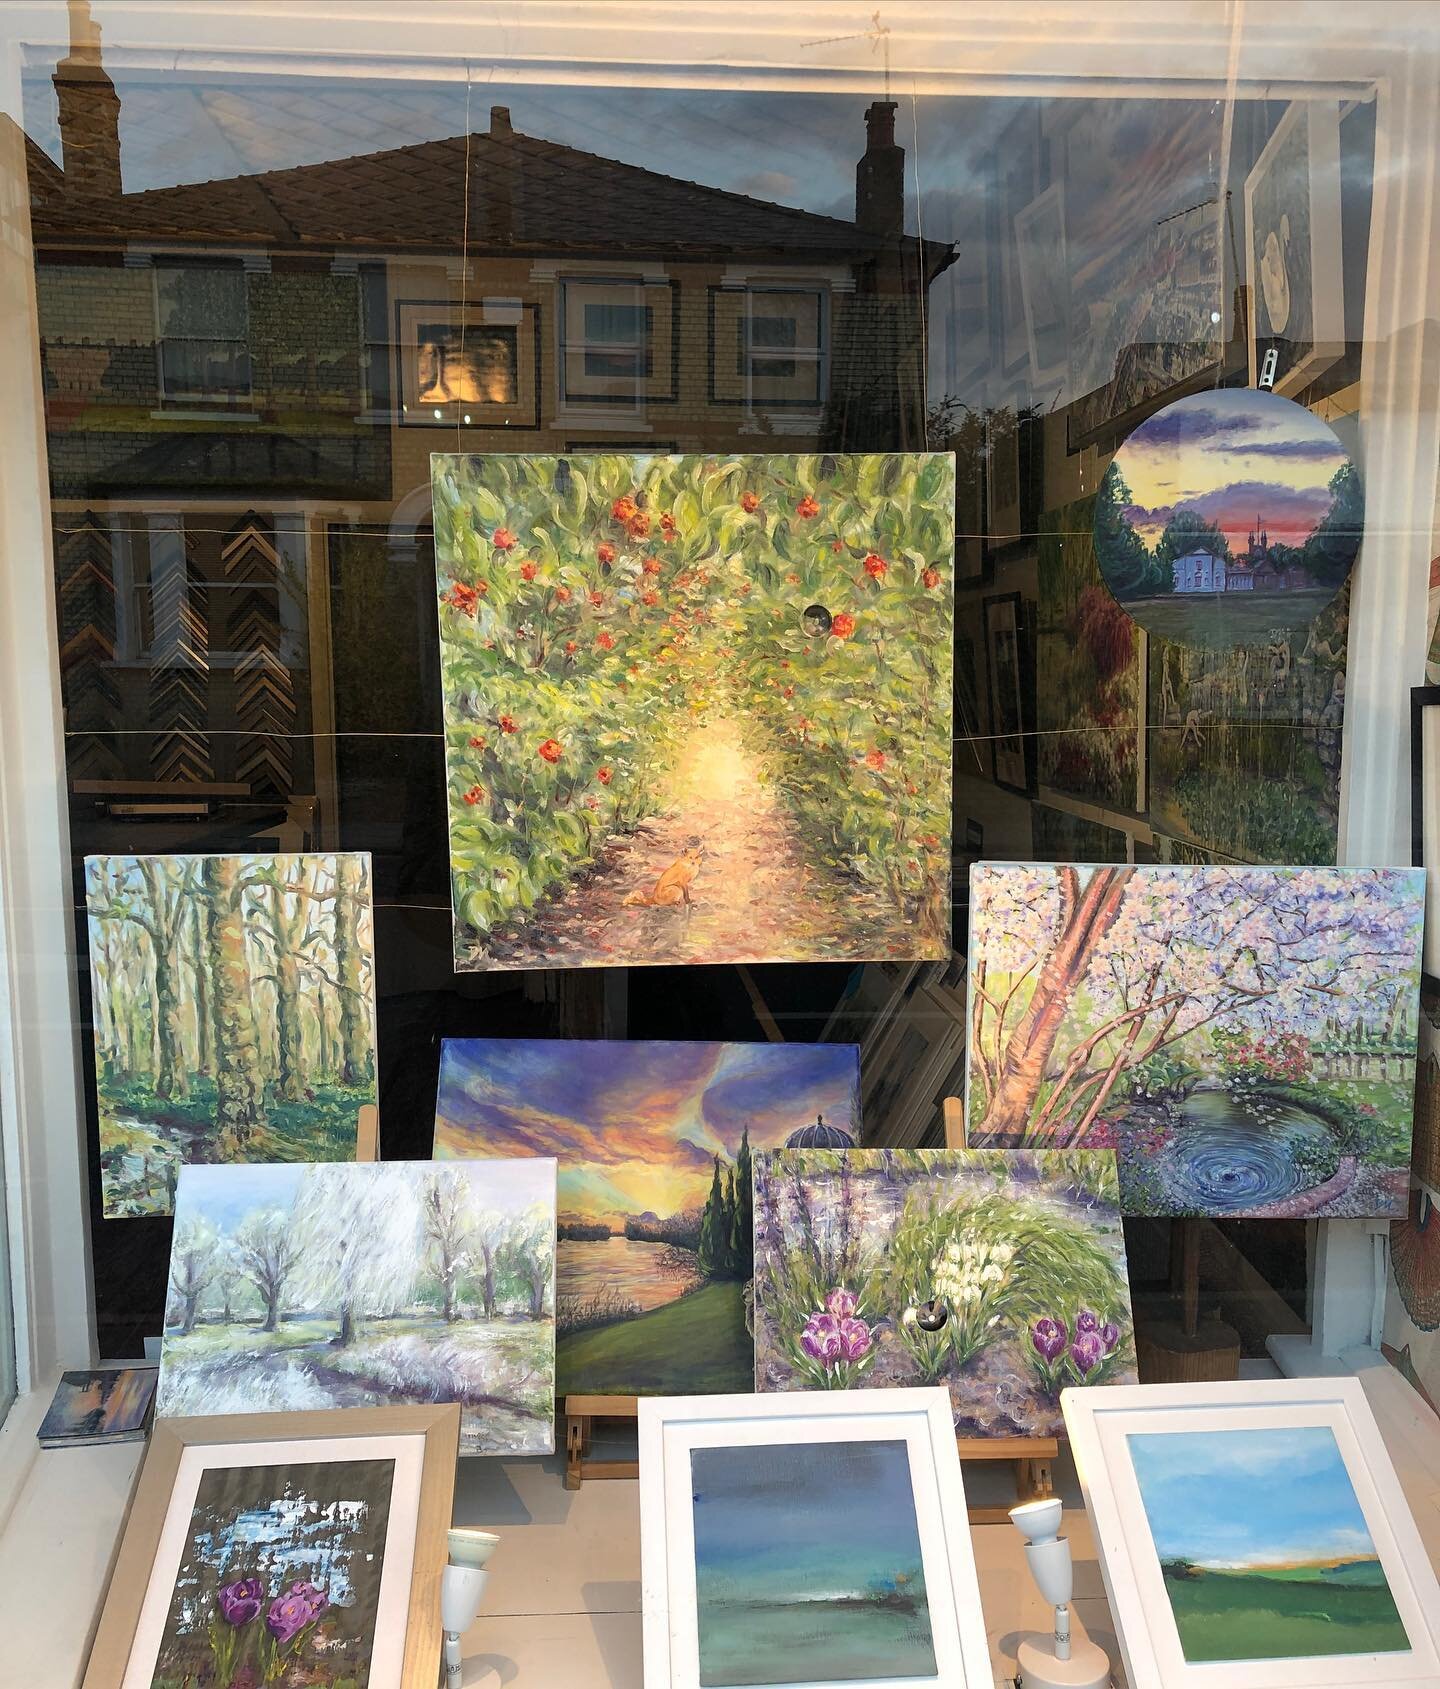 Dazzling Mr Fox moved in the window at @leighgalleryuk, joining all the other woodland paintings by @doinamoss. The gallery is fully open now and @leigh.warnick is busy making lots of bespoke frames Monday to Saturday 10am to 5:30pm.  https://www.lei